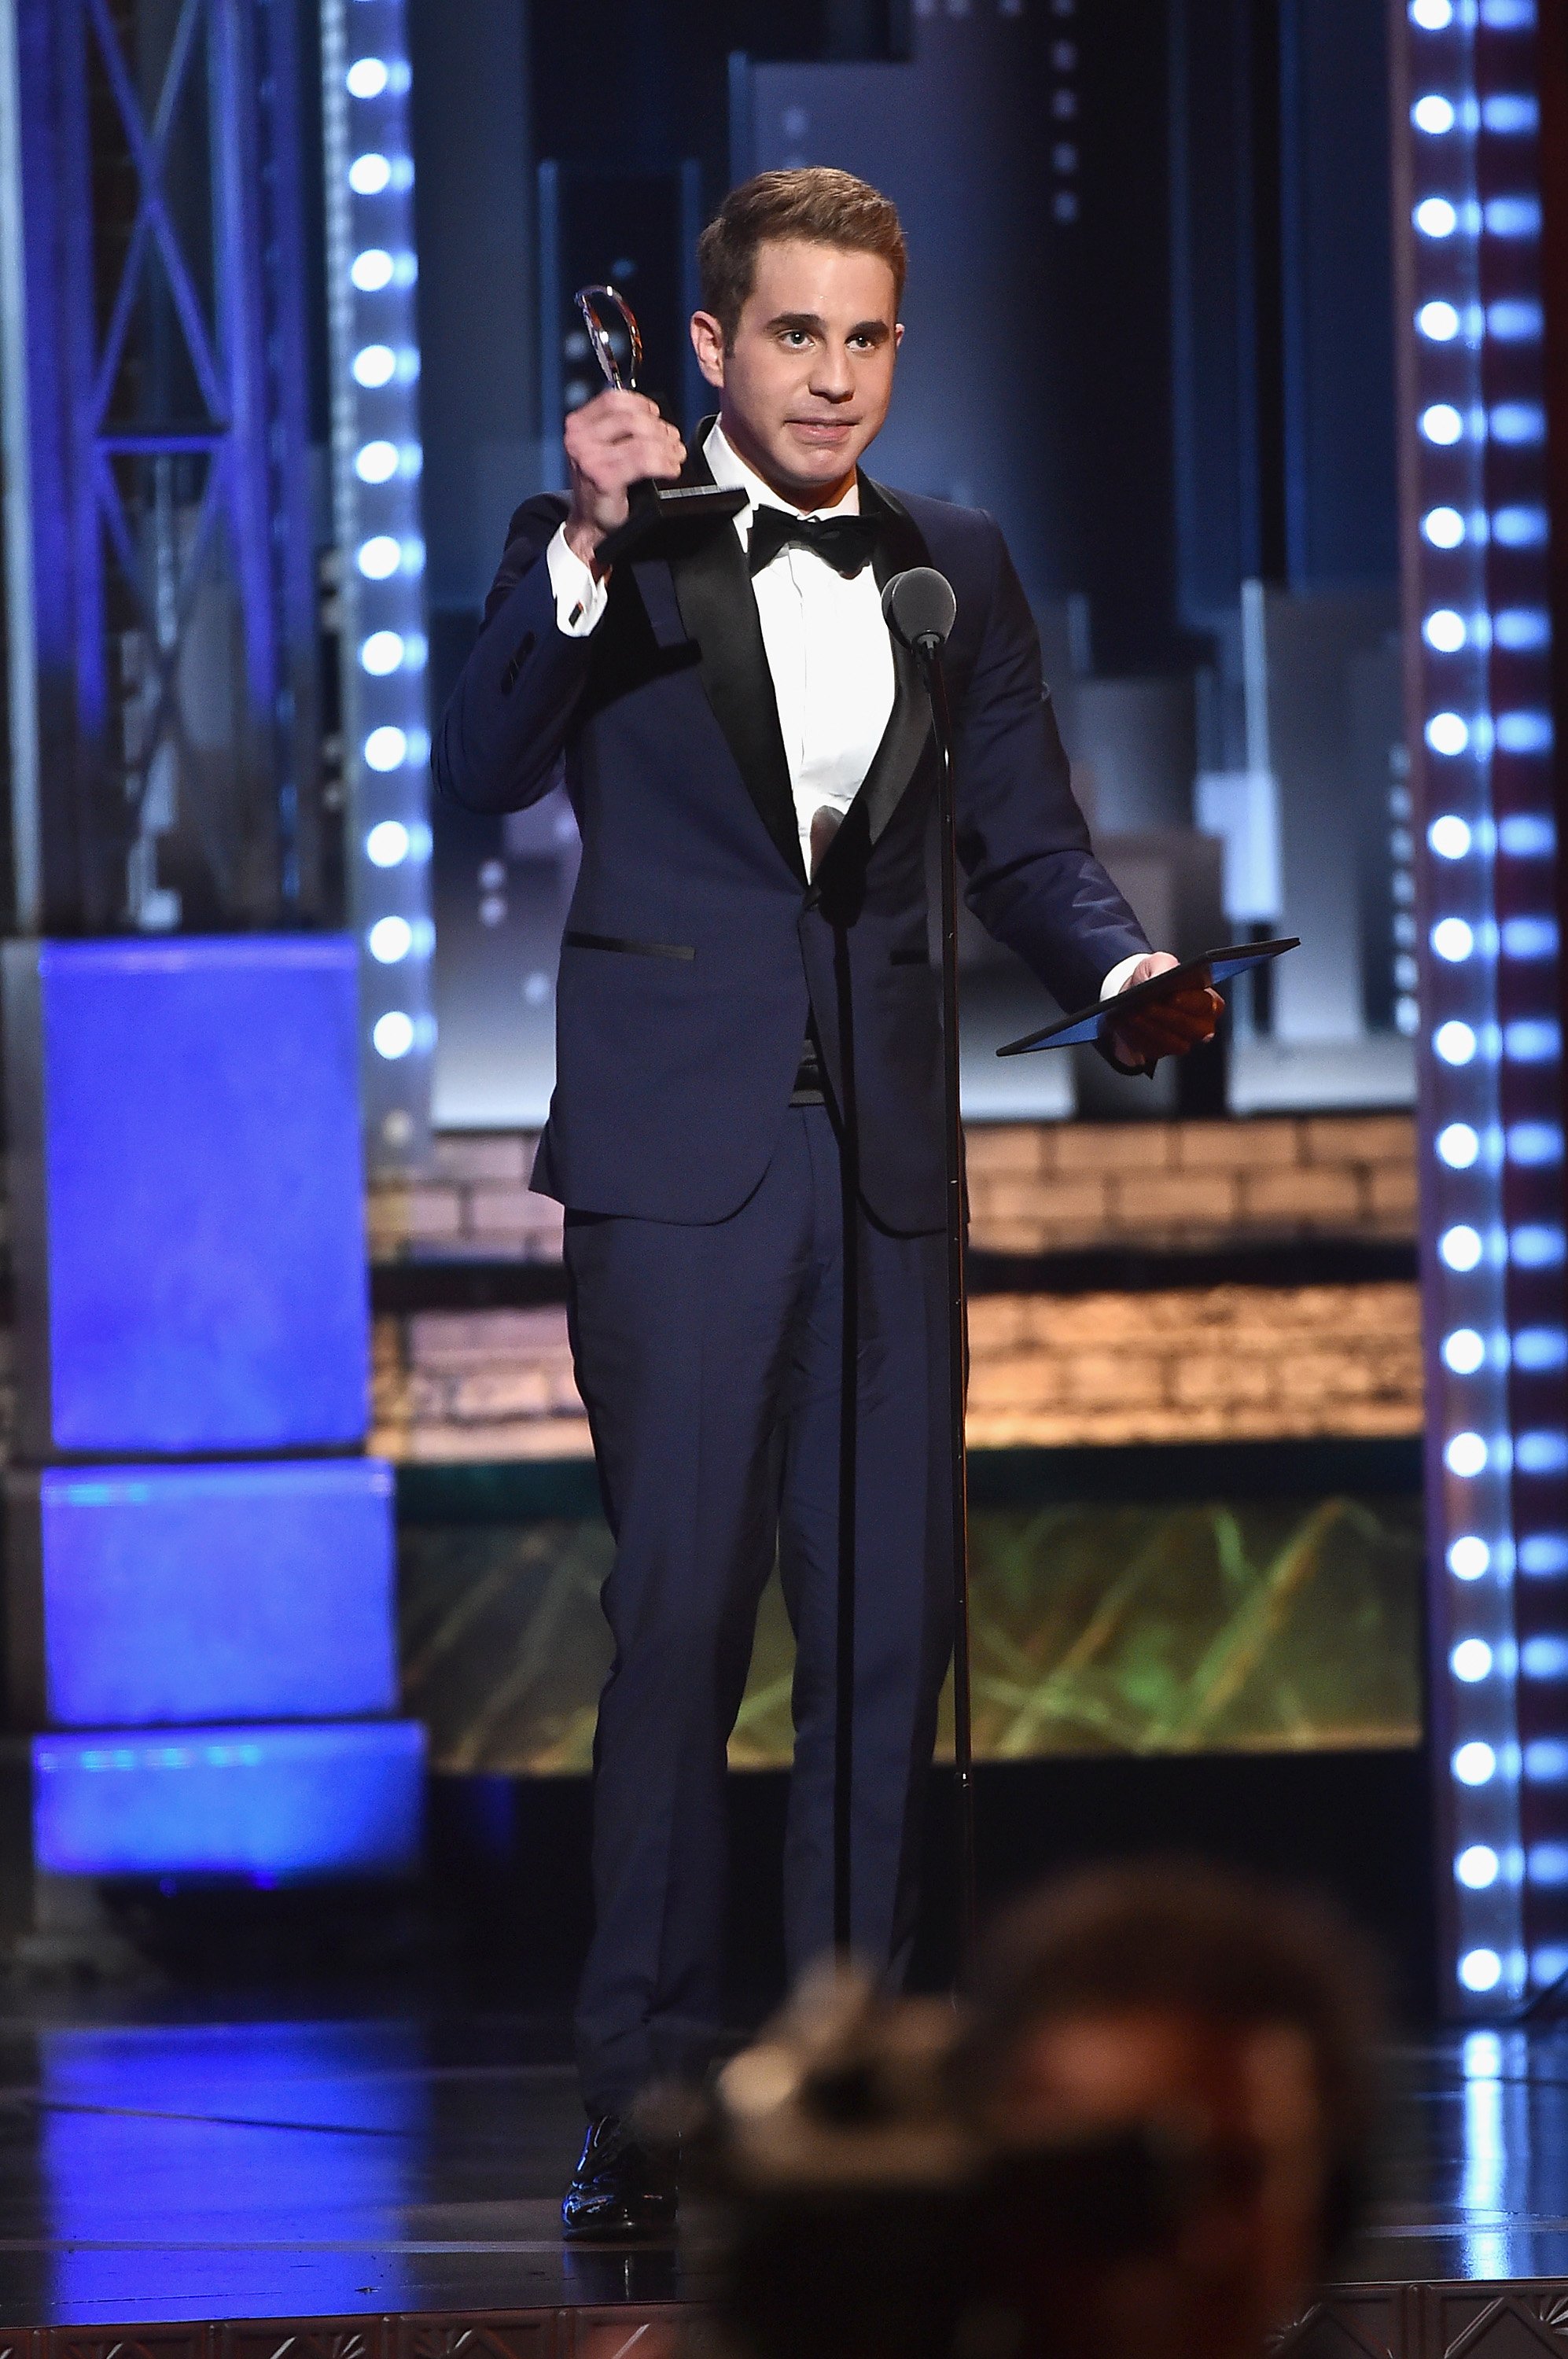 Ben Platt accepts the award for Best Performance by an Actor in a Leading Role in a Musical for 'Dear Evan Hansen' onstage during the 2017 Tony Awards at Radio City Music Hall on June 11, 2017 in New York City